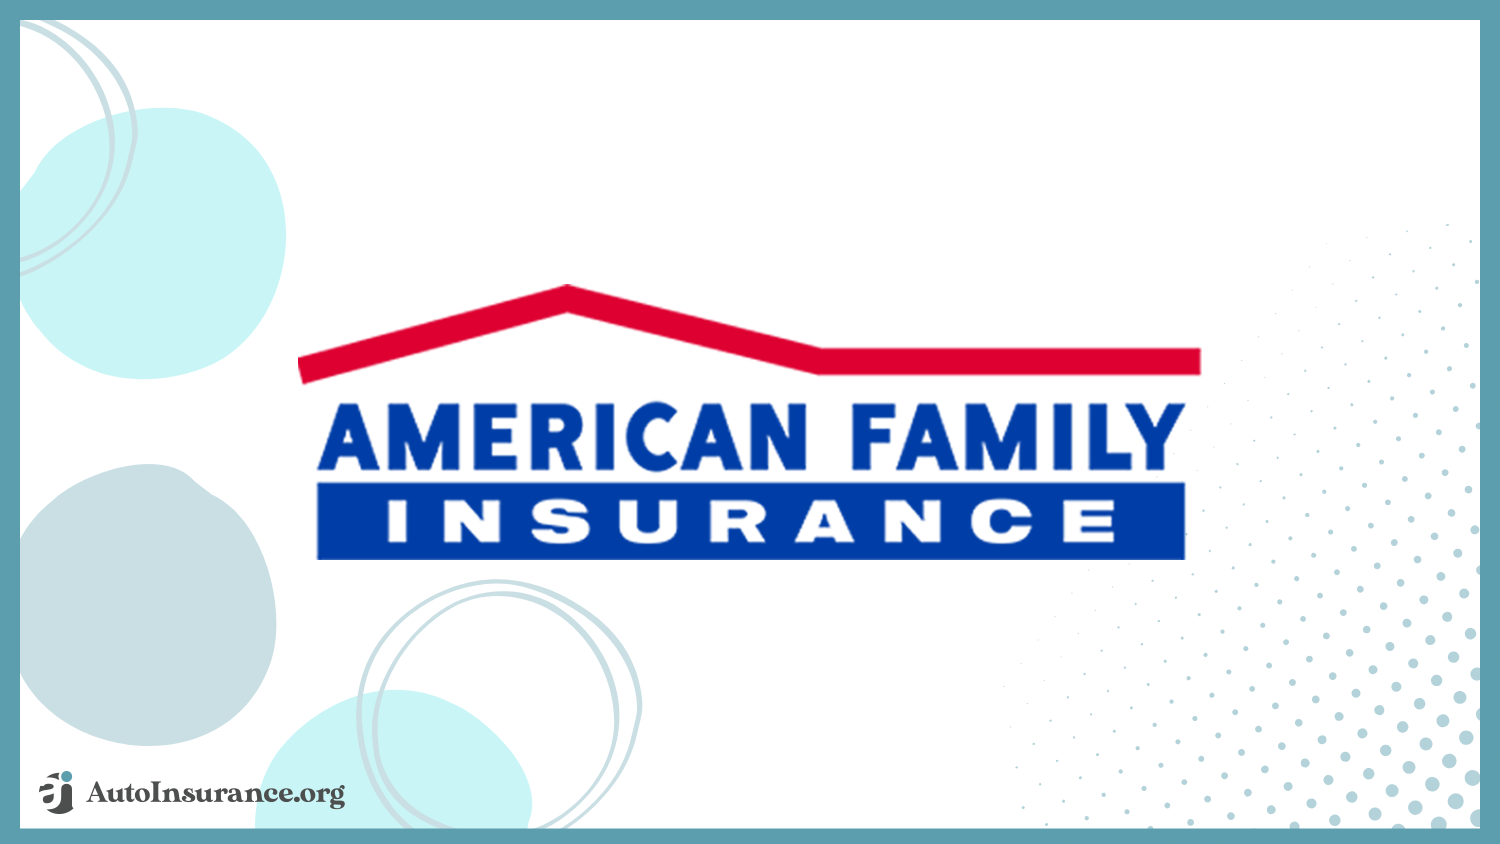 American Family: Best Auto Insurance for Luxury Cars